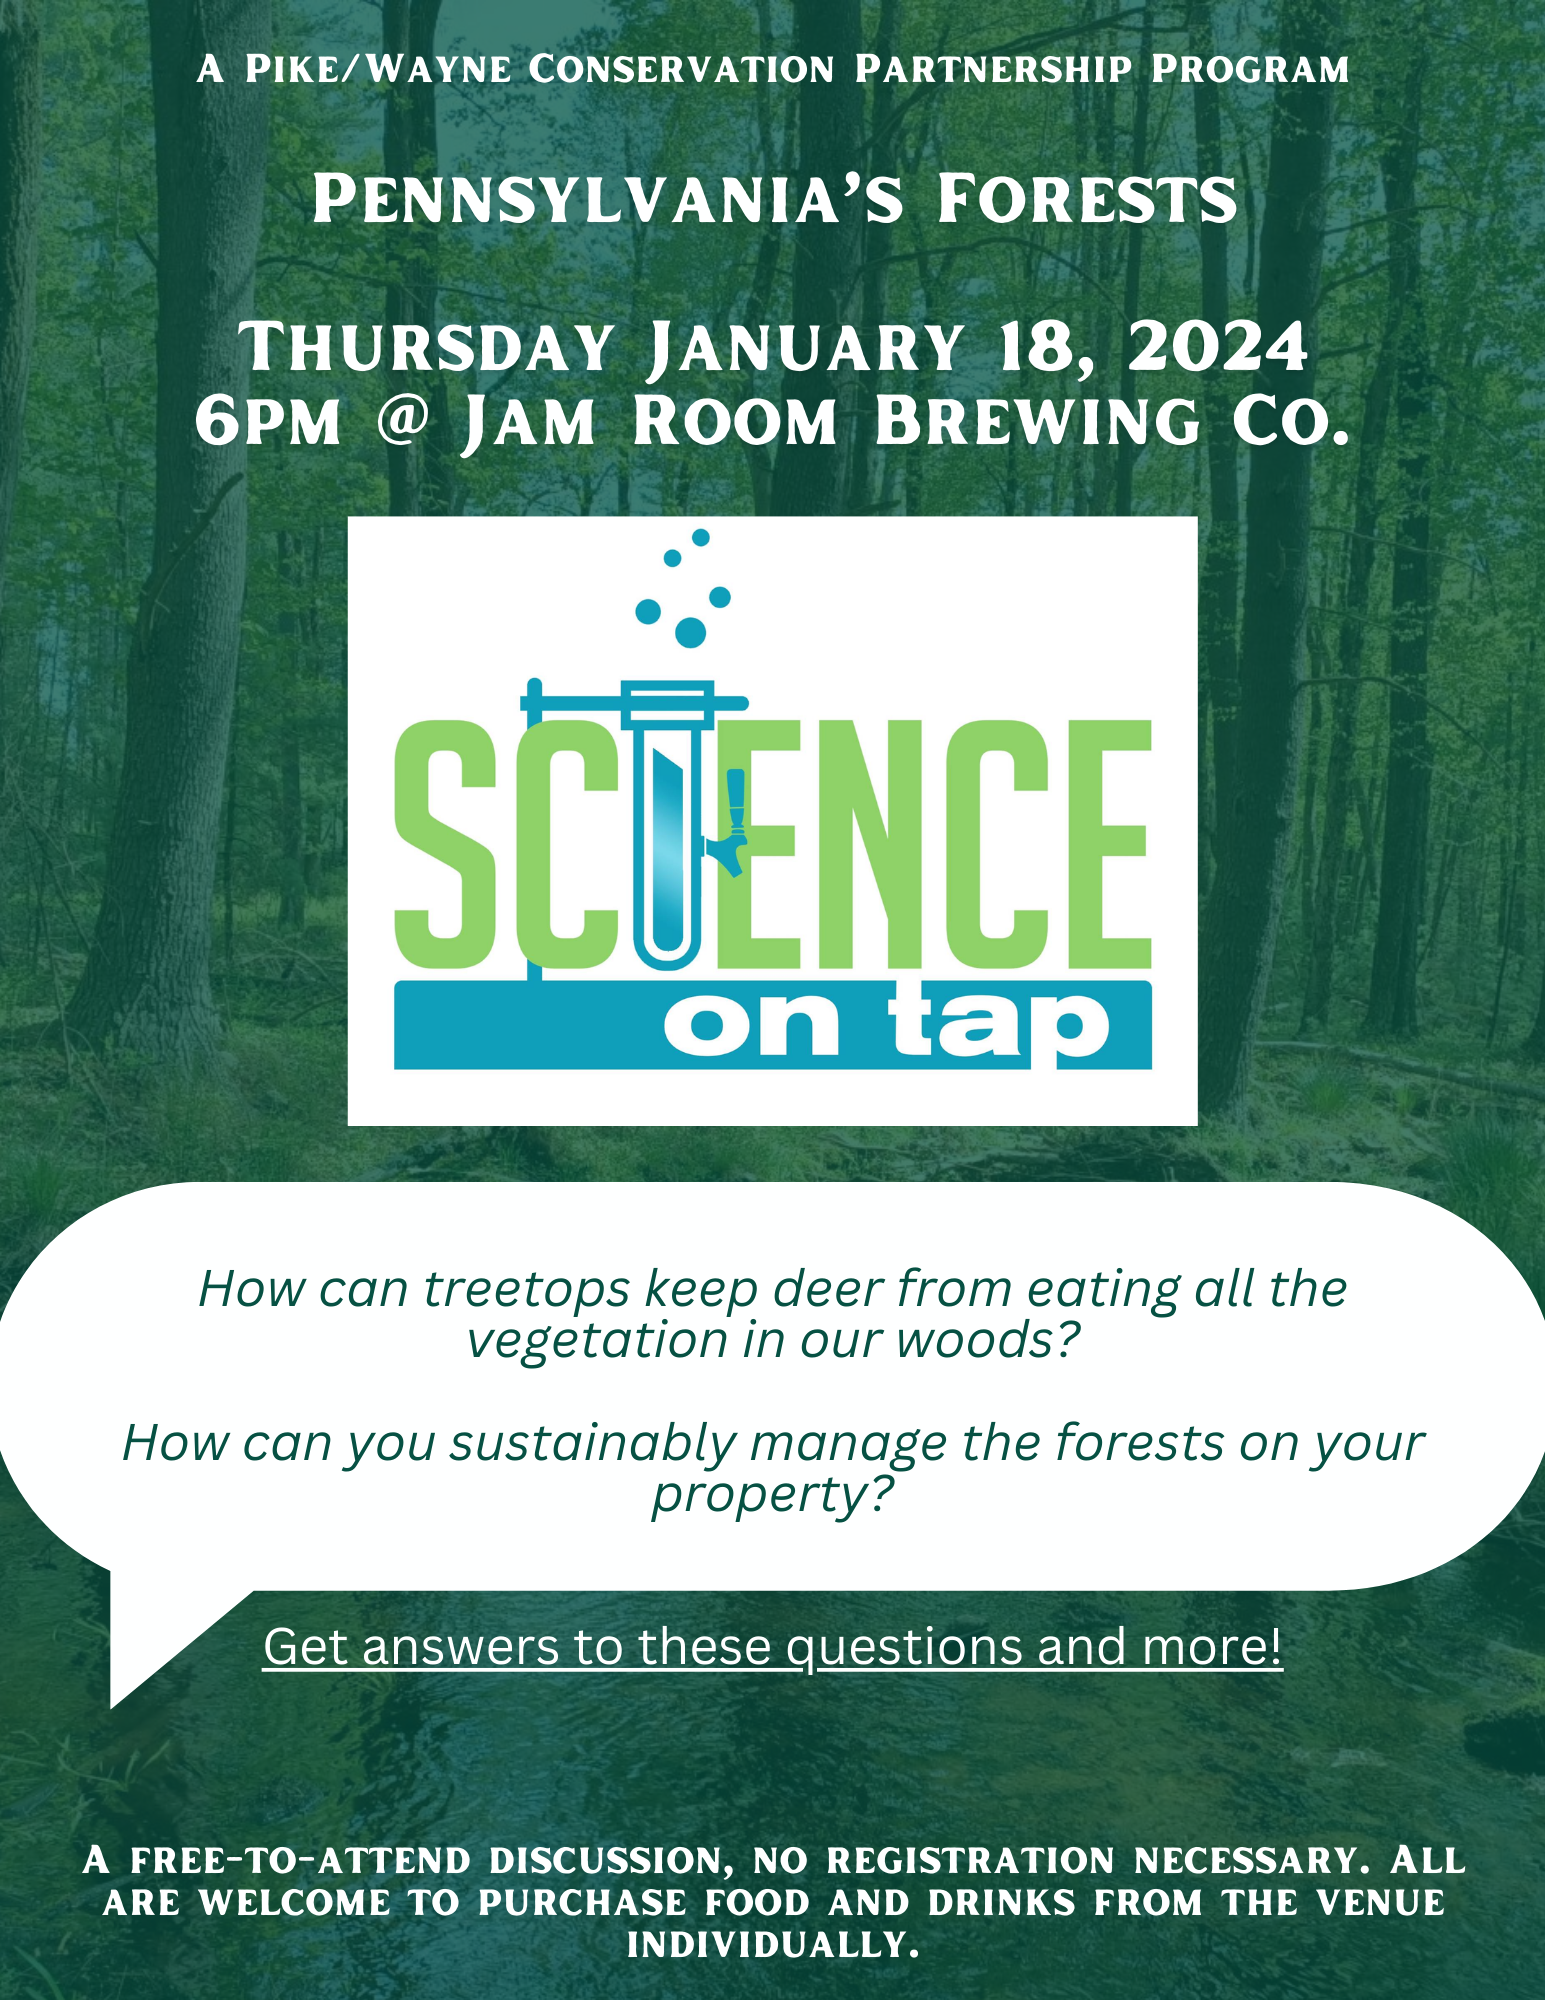 A flyer for the Science on Tap event with text overlaid on a photo of a forest "January's topic: Pennsylvania's Forests! By Shelby Chorba from Northern Tier Hardwood Association How can treetops keep deer from eating all the vegetation in our woods? How can you sustainably manage the forests on your property? Get answers to these questions and more! The discussion is free to attend with no registration required, and participants are welcome to purchase food and drinks from the host Jam Room Brewing Co. individually."